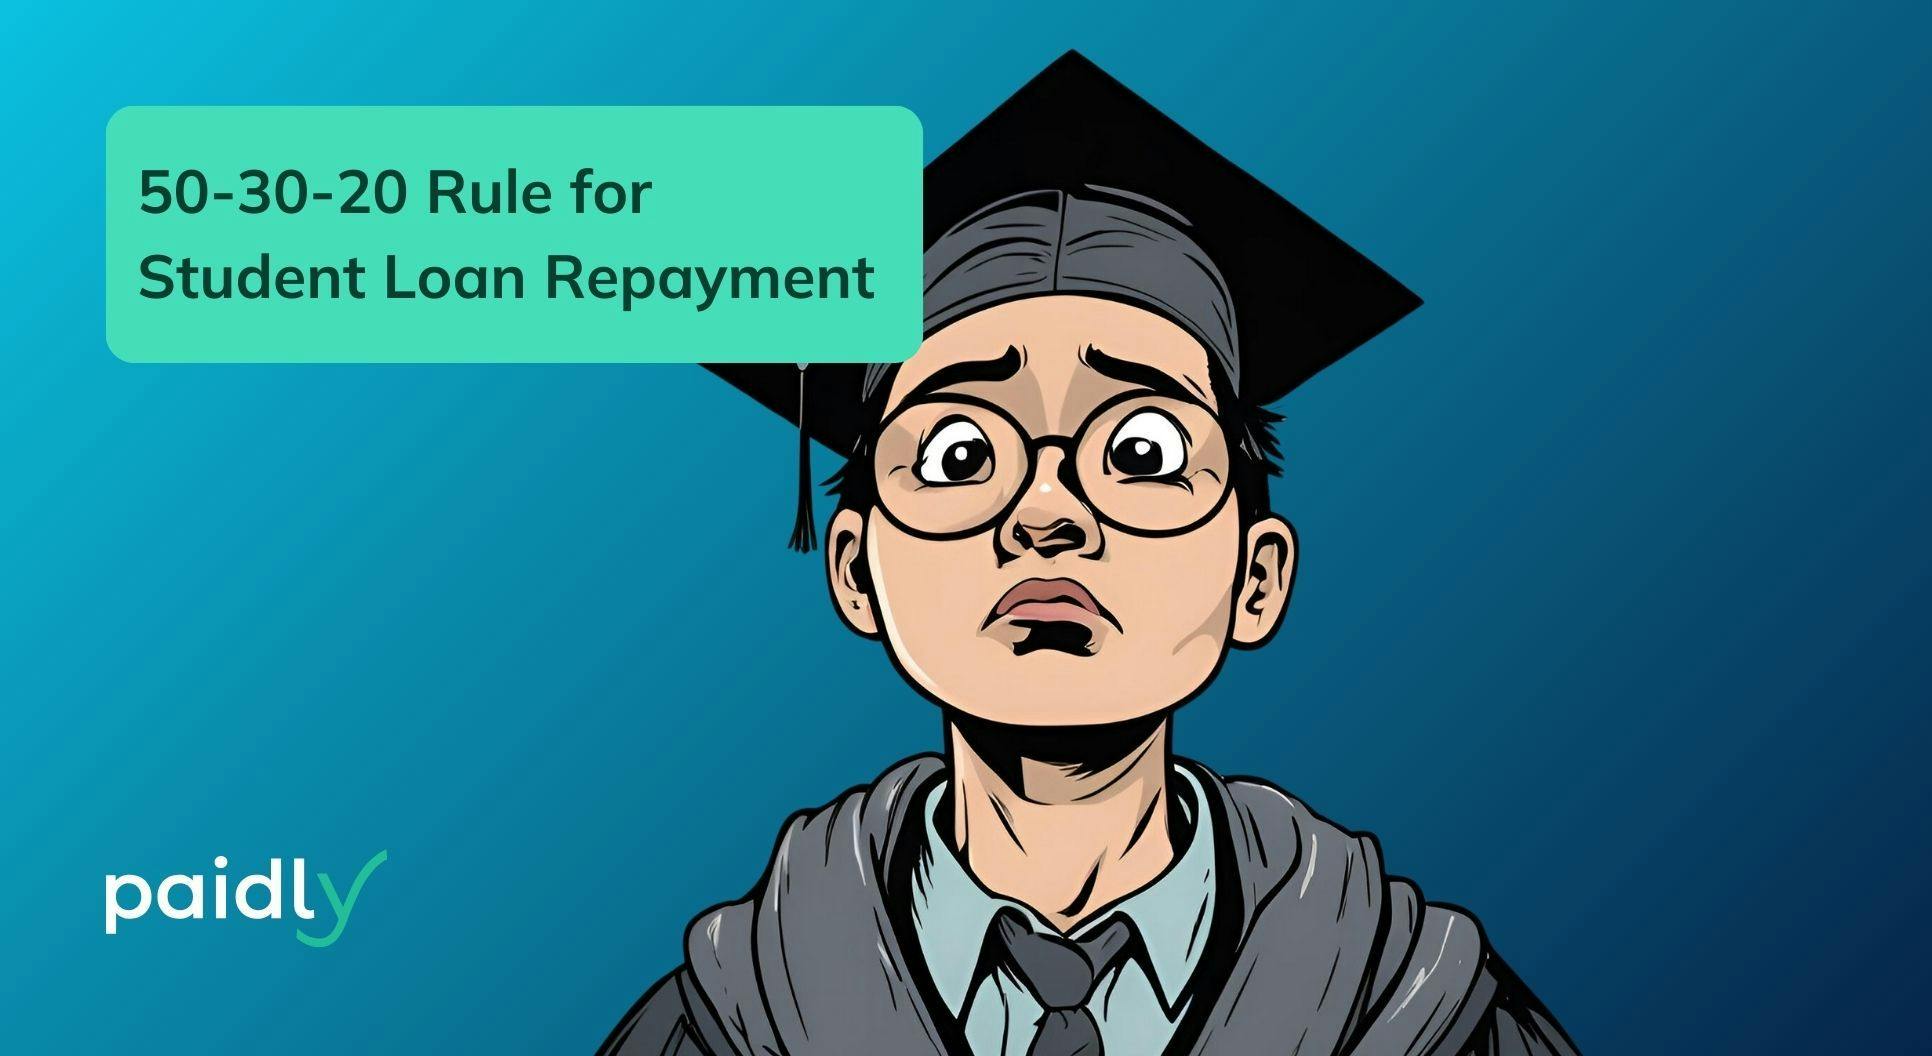 50-30-20 Rule for Student Loan Repayment, graduate stressed